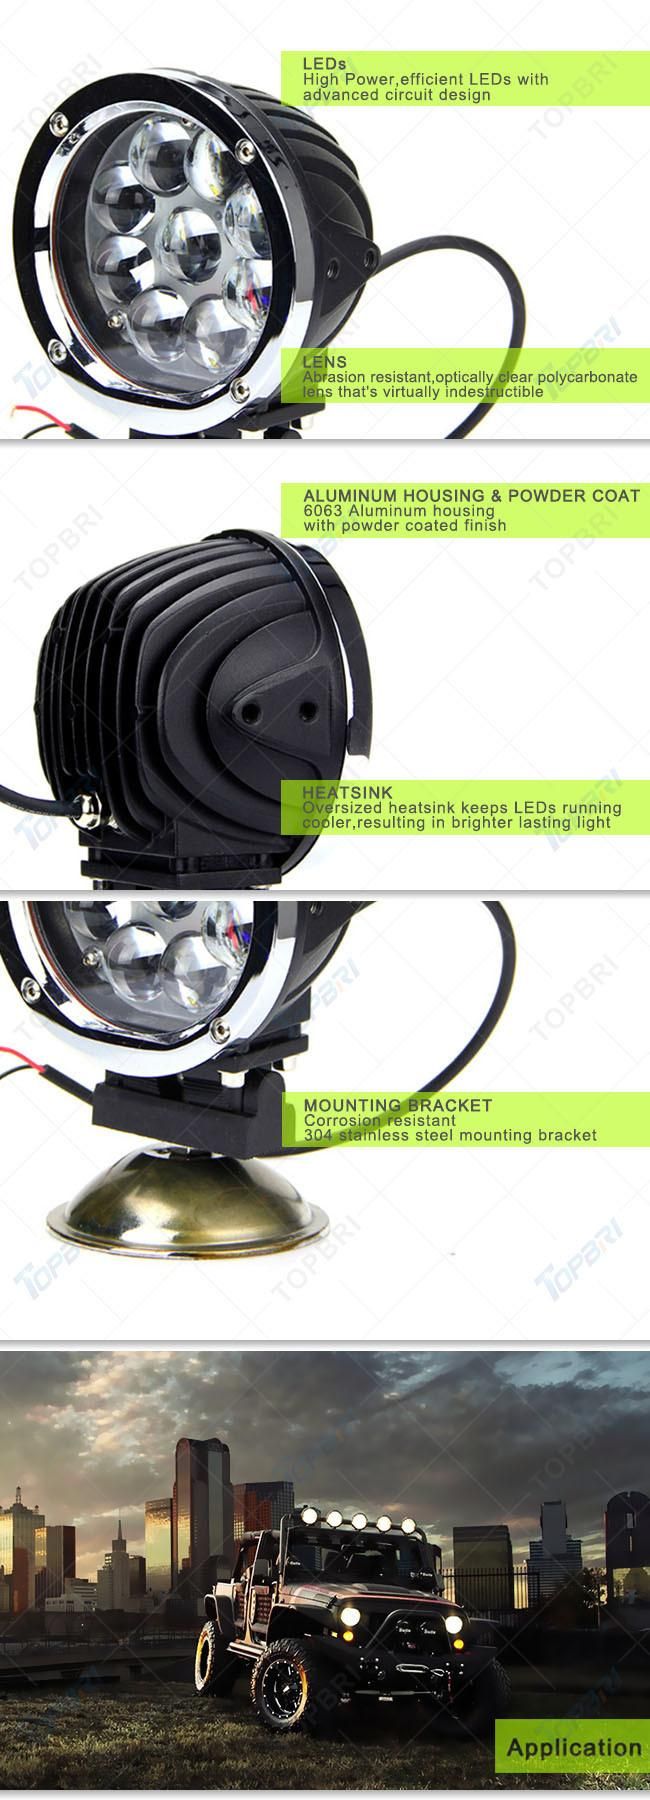 Automobile Lighting 5.5inch 45W Offroad LED Driving Lights for Excavator